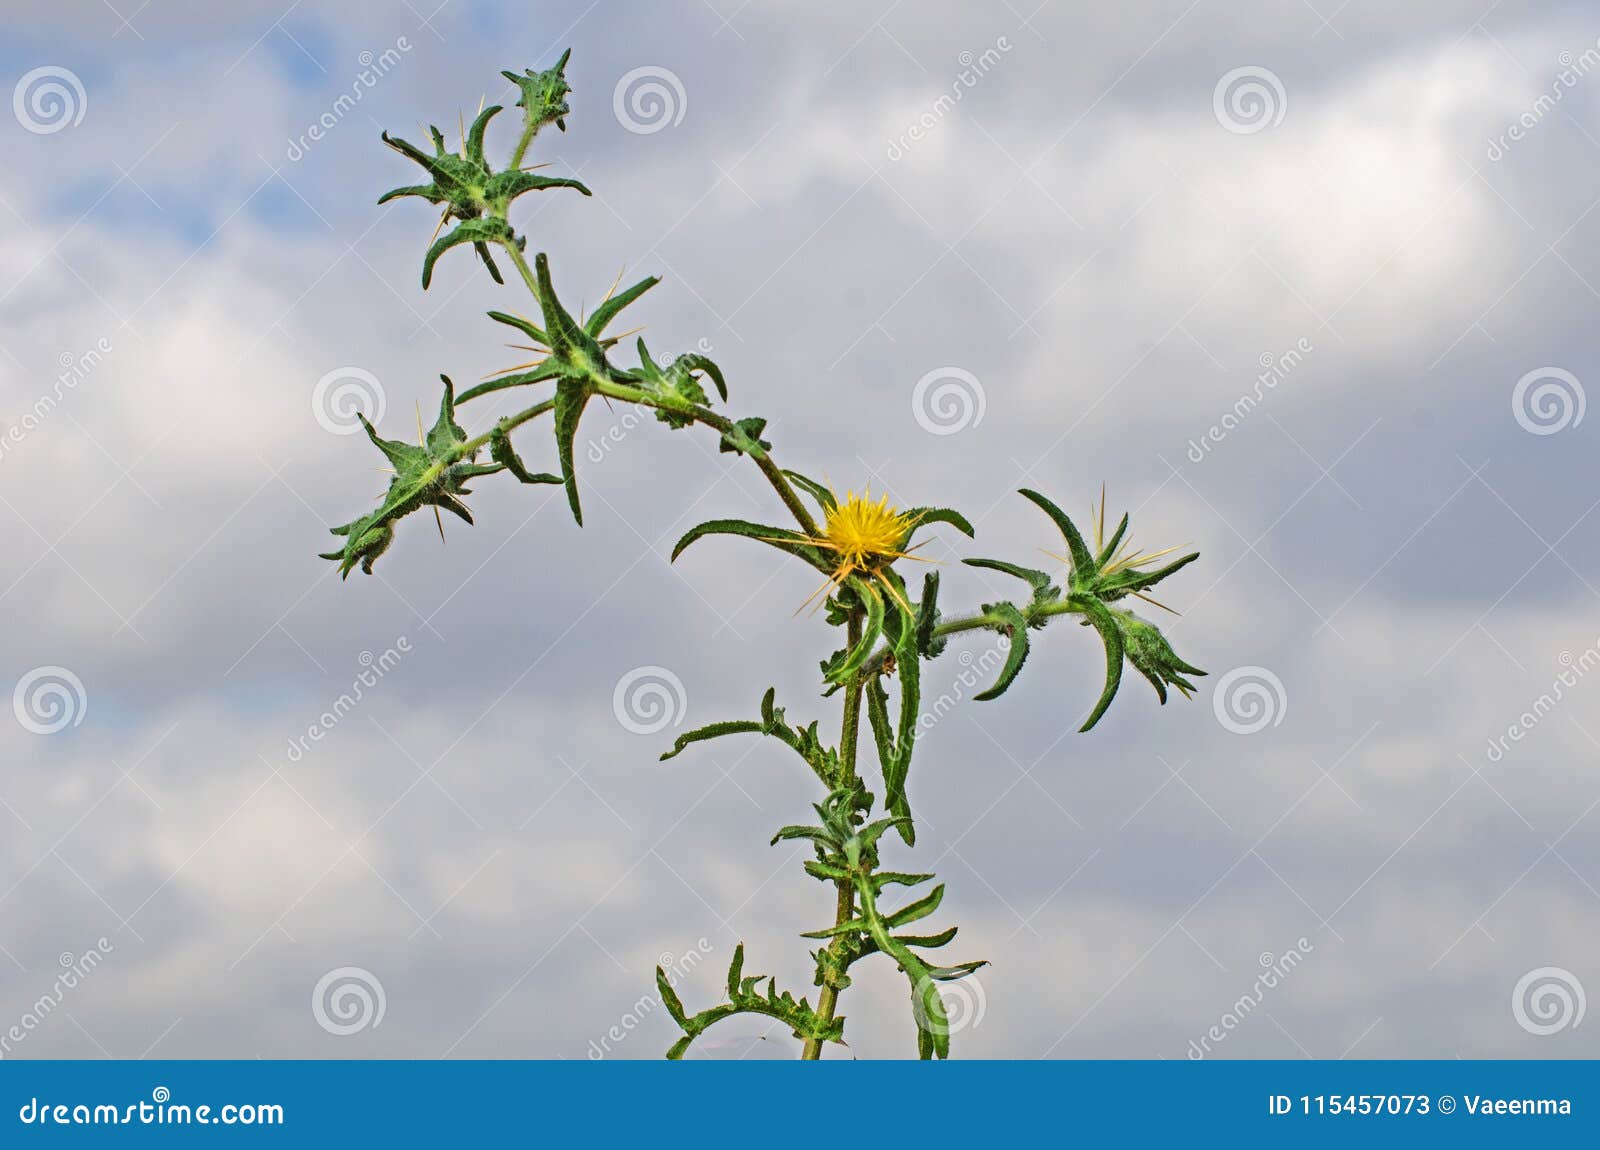 Flower on sky background stock image. Image of cloud - 115457073